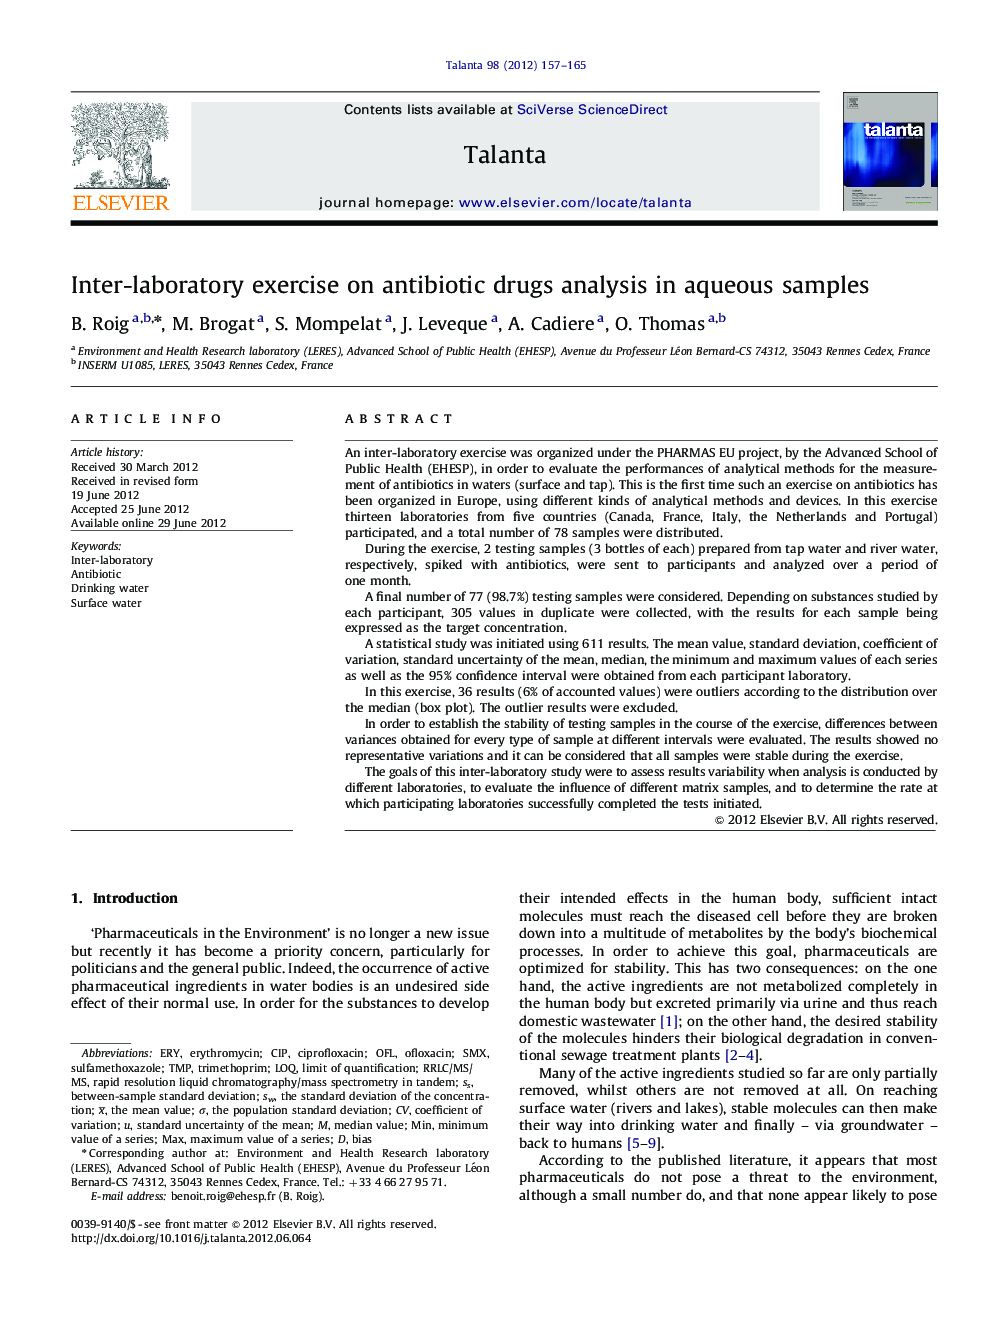 Inter-laboratory exercise on antibiotic drugs analysis in aqueous samples